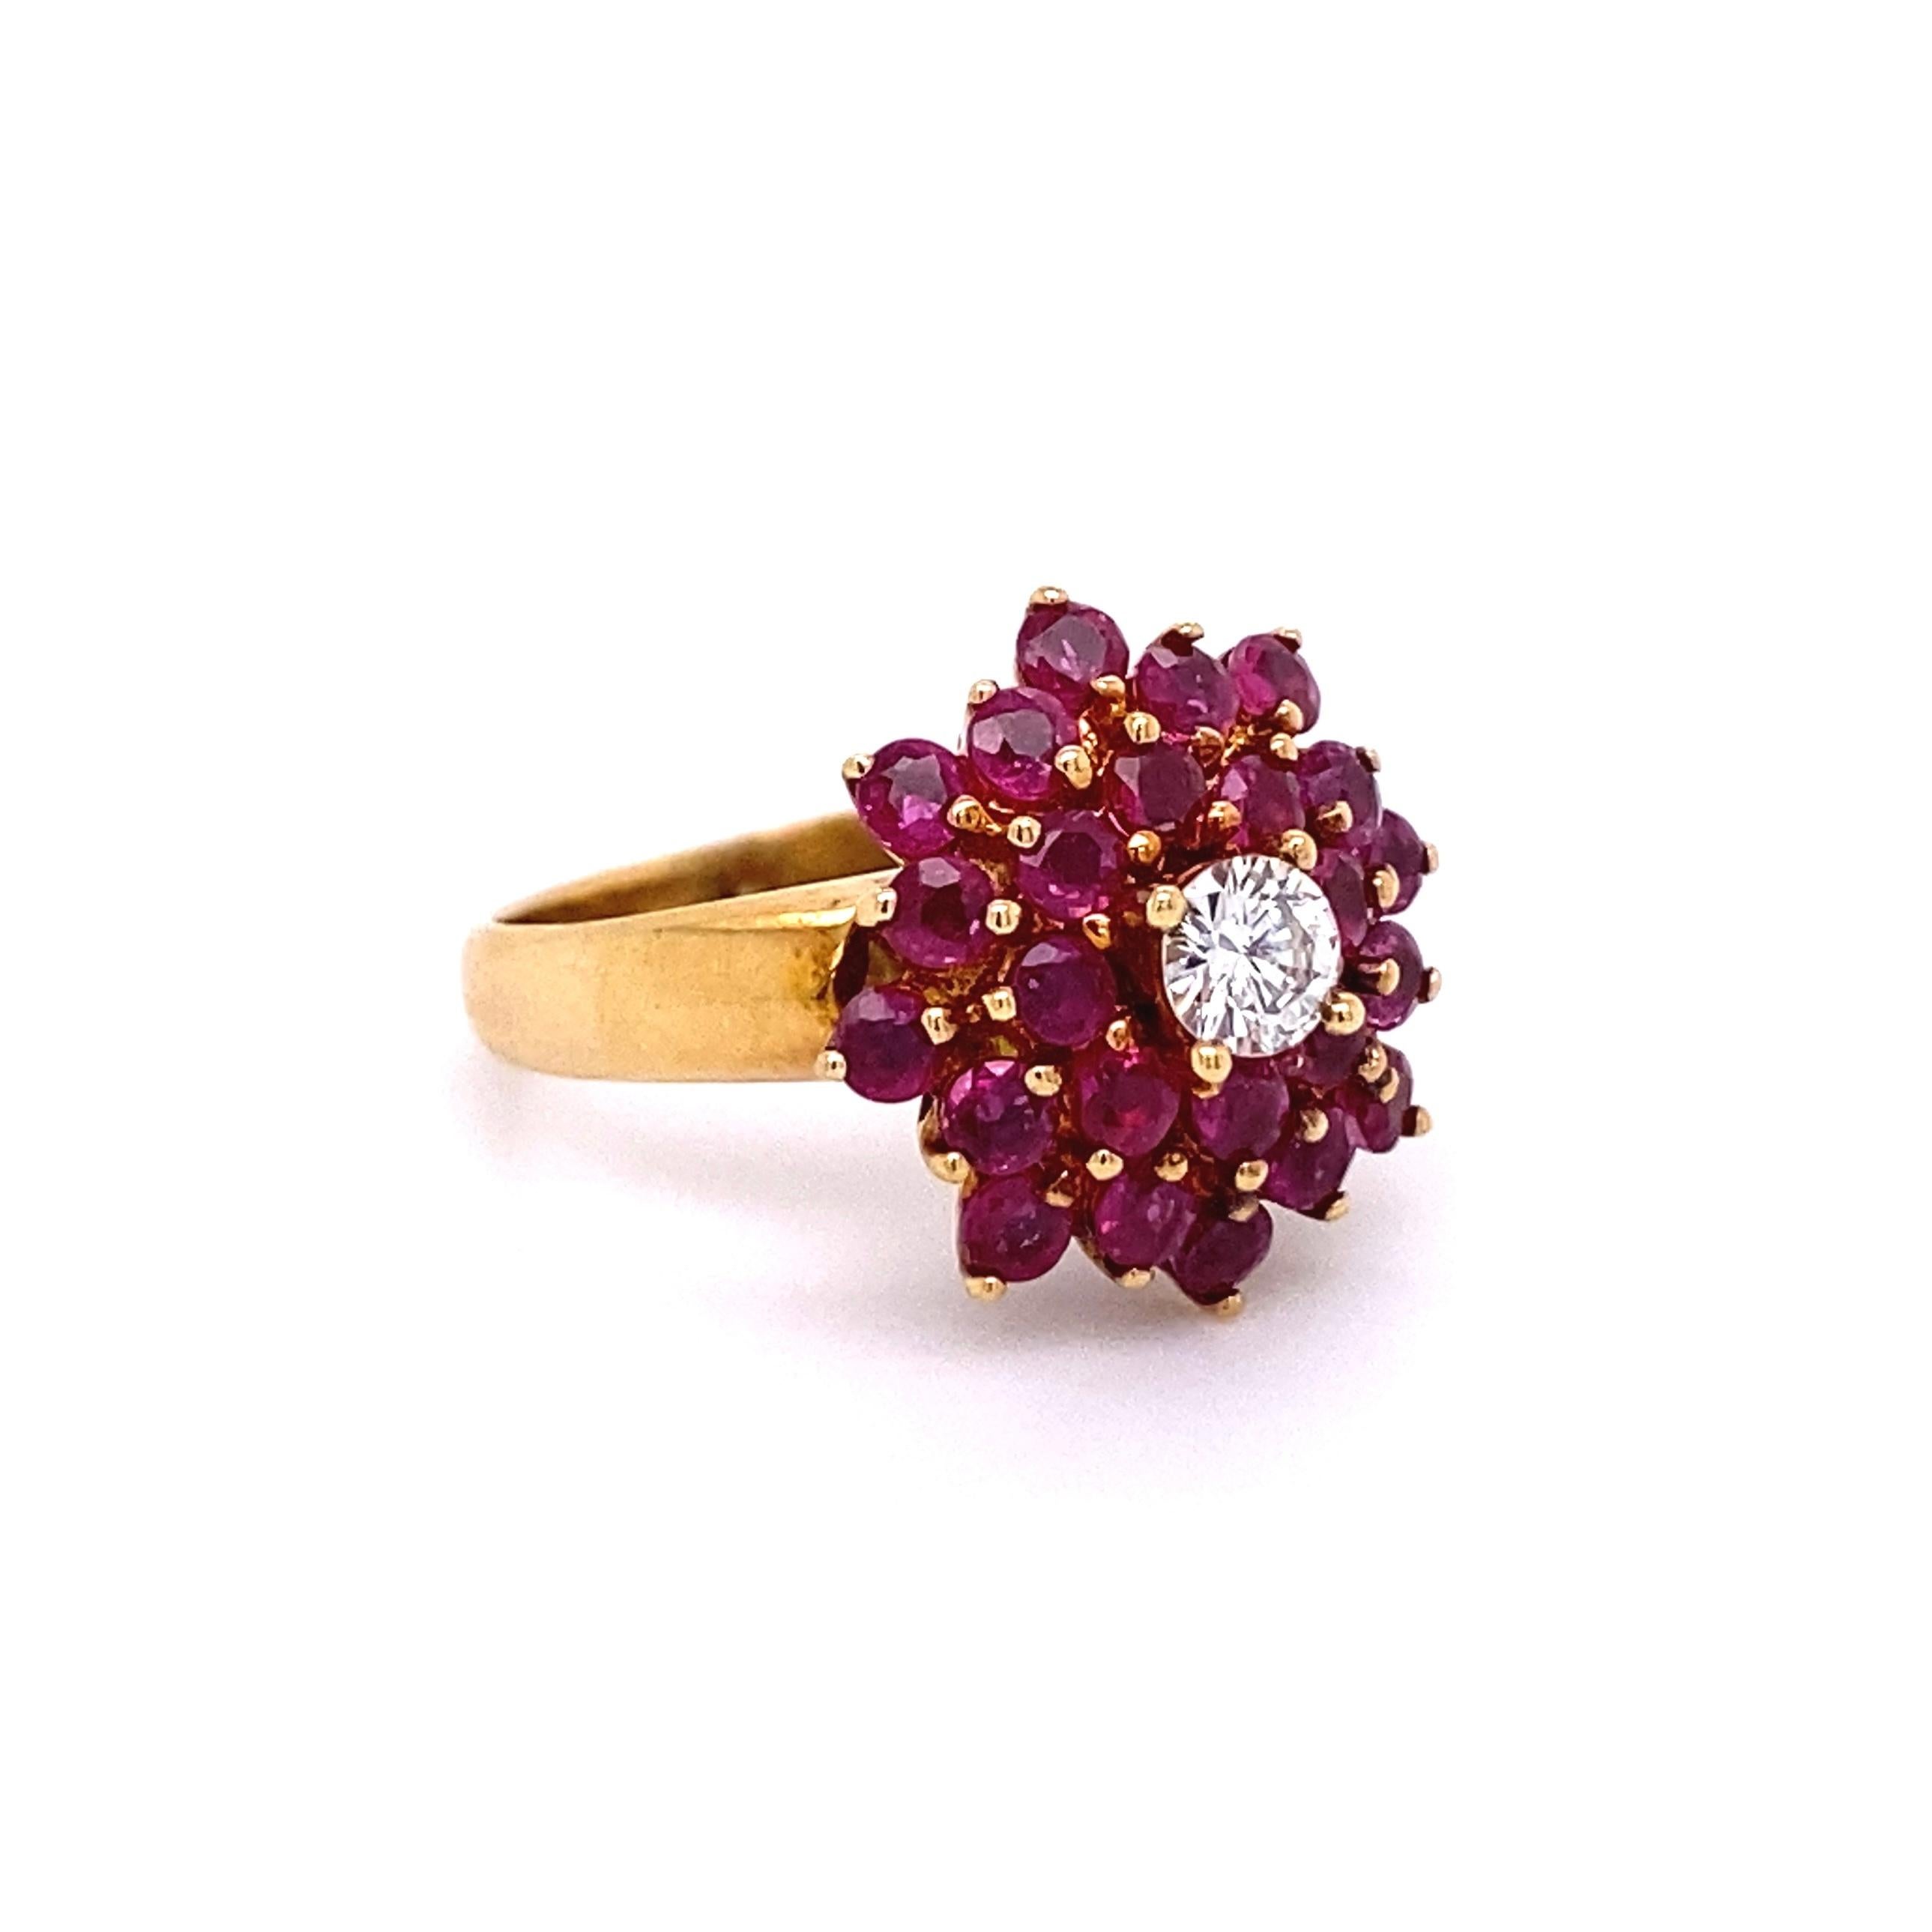 Beautiful Ruby and Diamond Cluster Ring, centering a Diamond weighing approx. 0.17 Carat surrounded by Rubies, approx. 1.36tcw. The ring is Hand crafted in 18K Yellow Gold. Measuring approx. 0.92”L x 0.68”W x 0.55”H. Ring Size 4, we offer ring